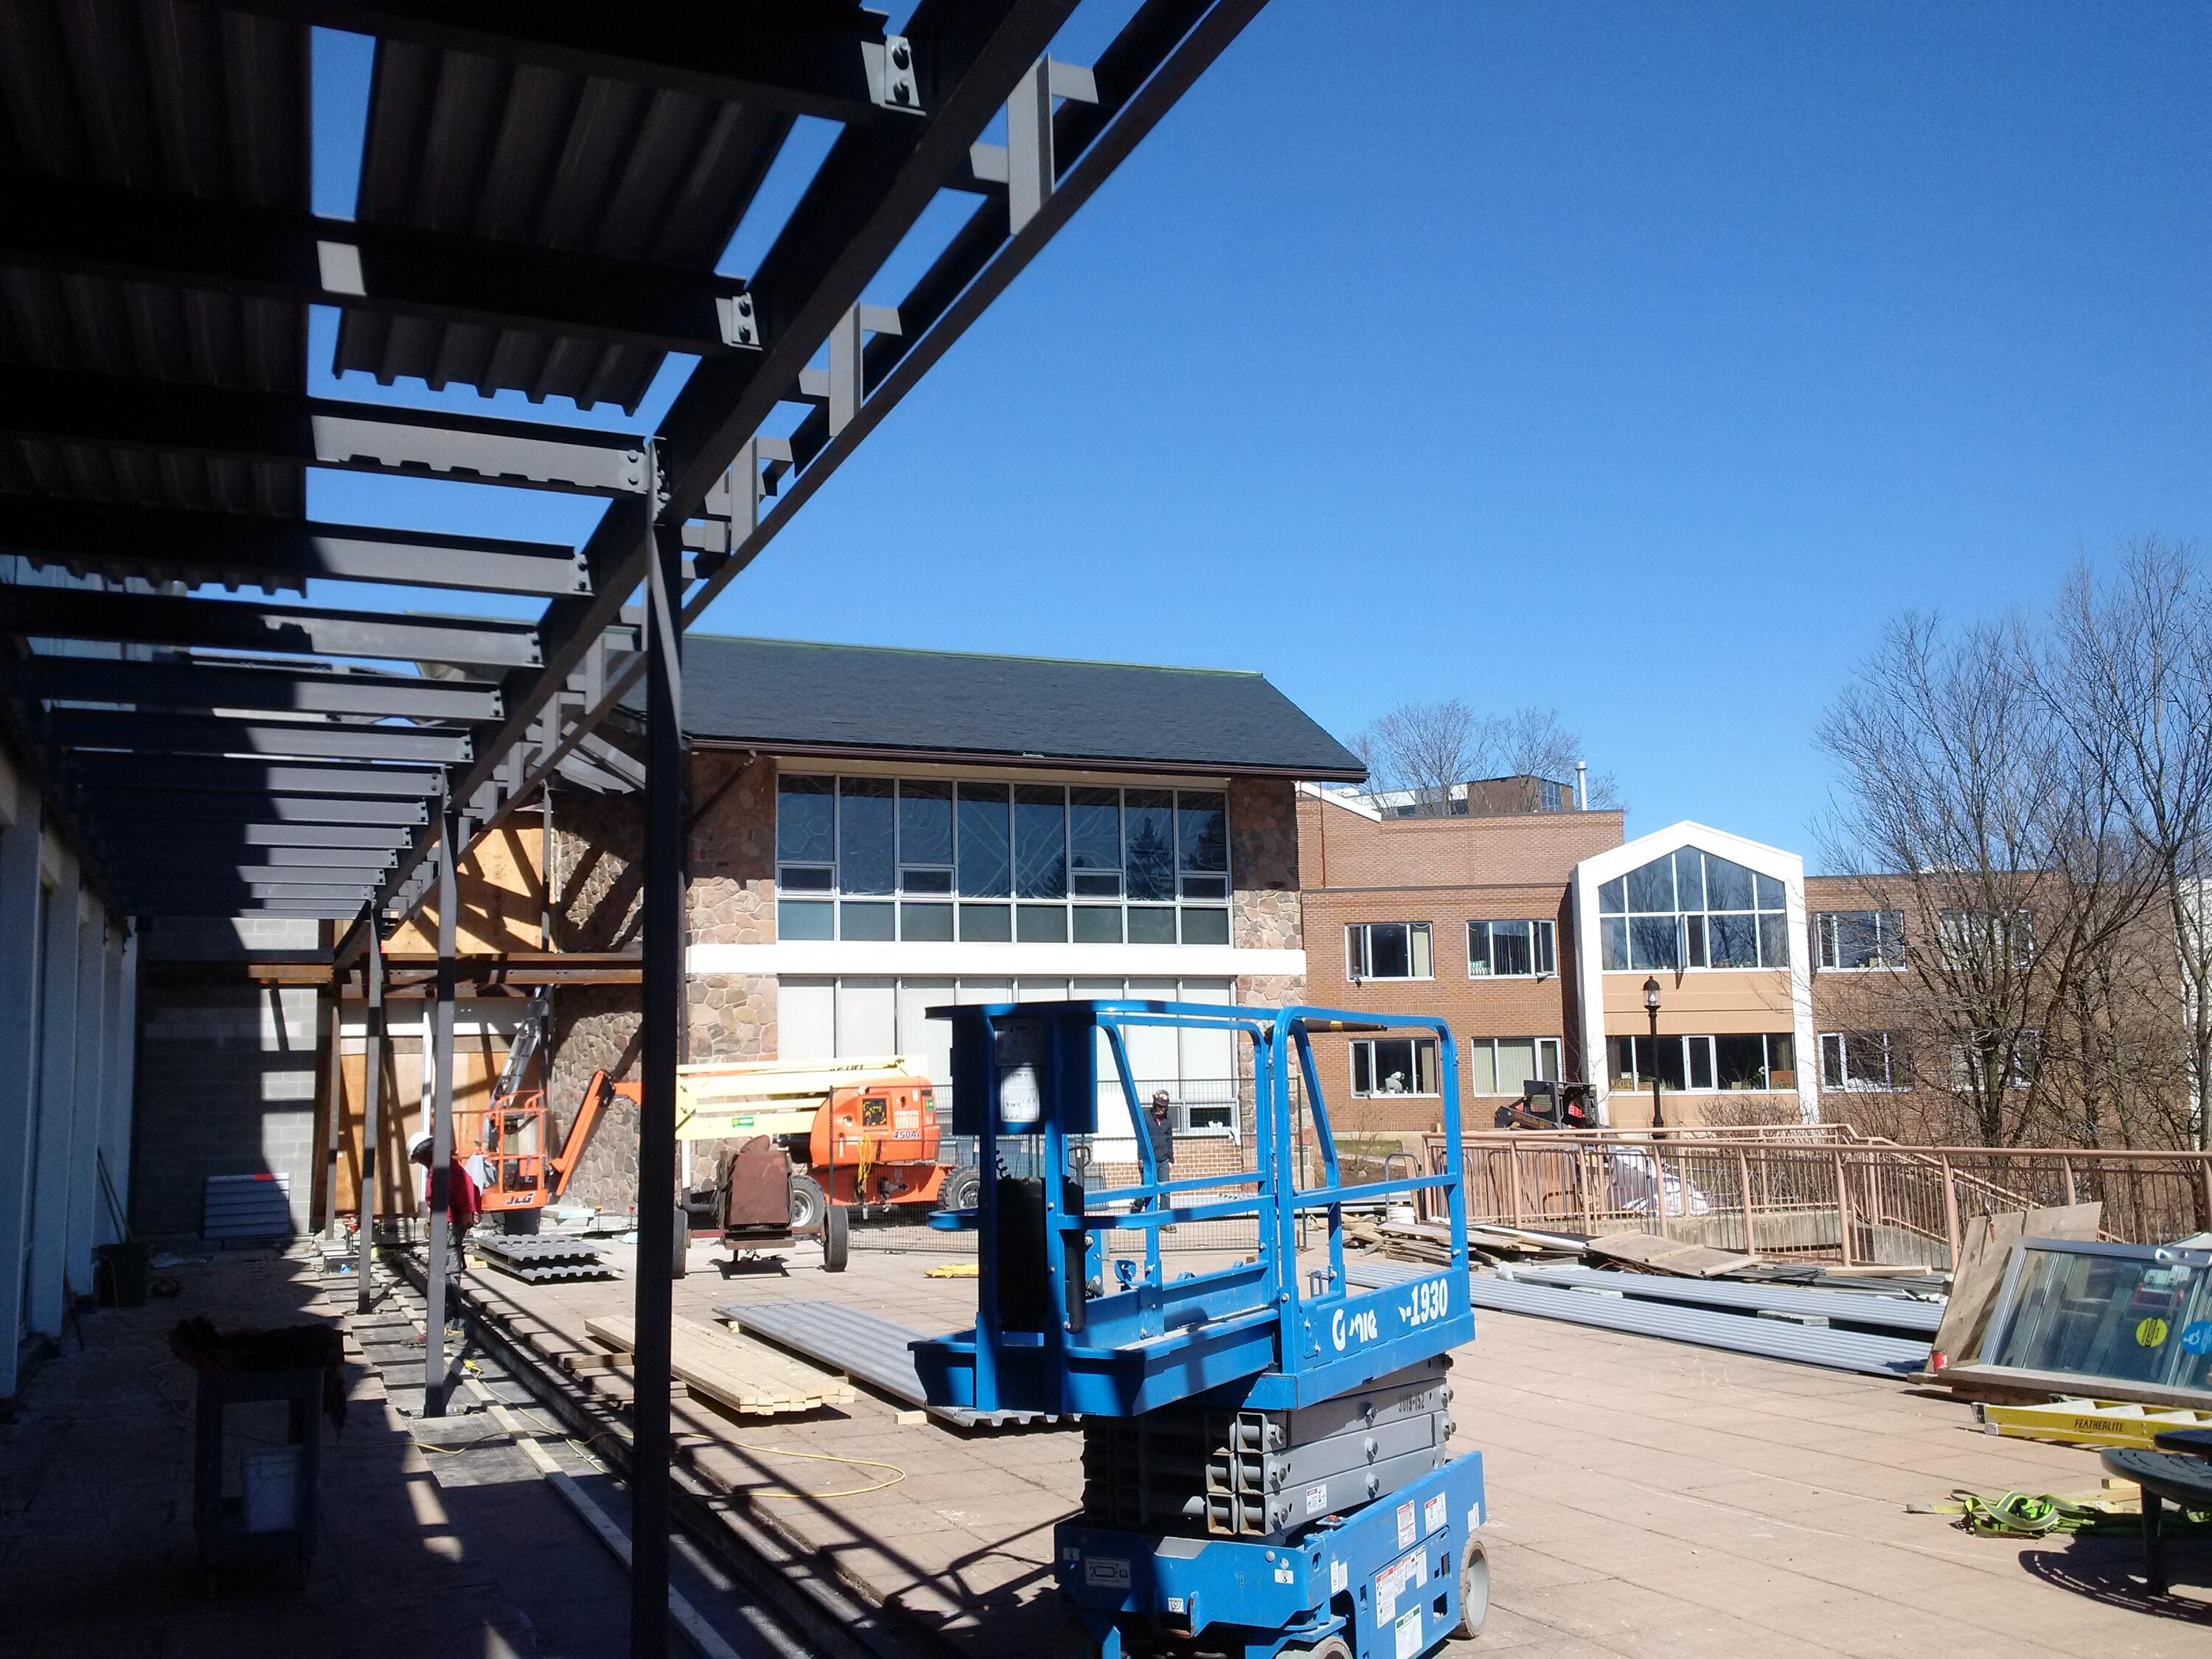 Steel goes up outside the grebel patio